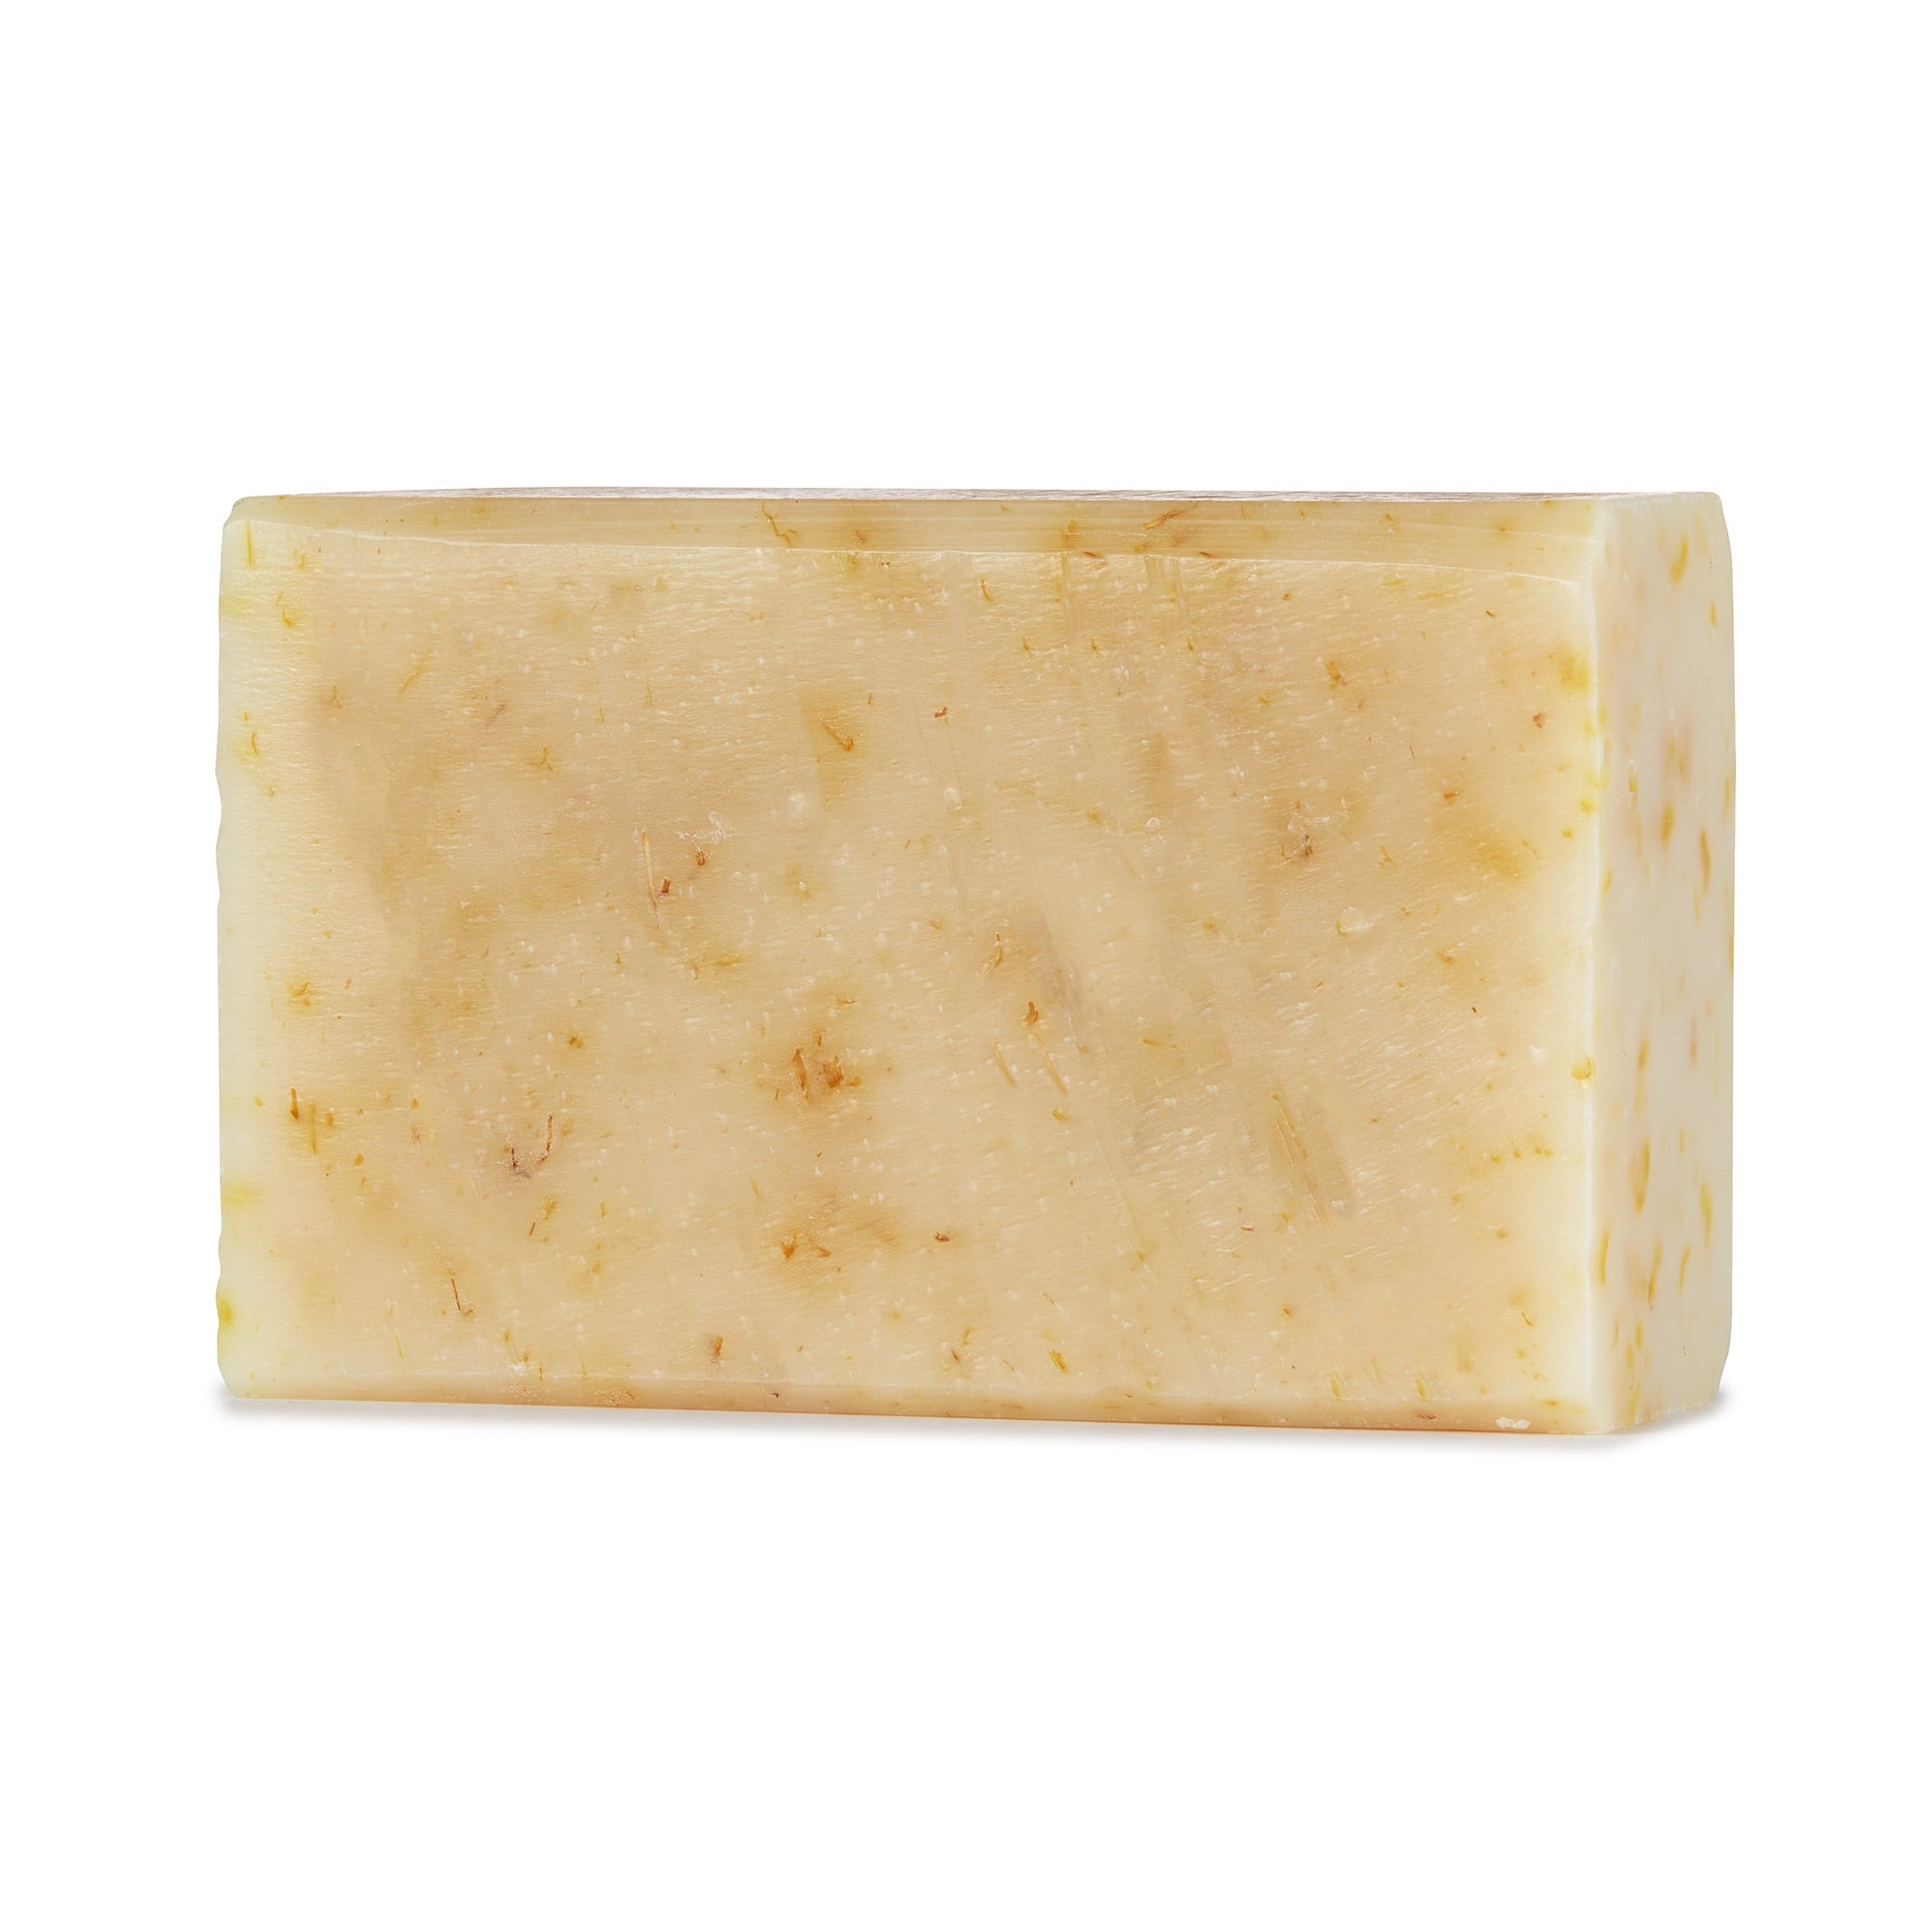 Unscented soap on a white background.